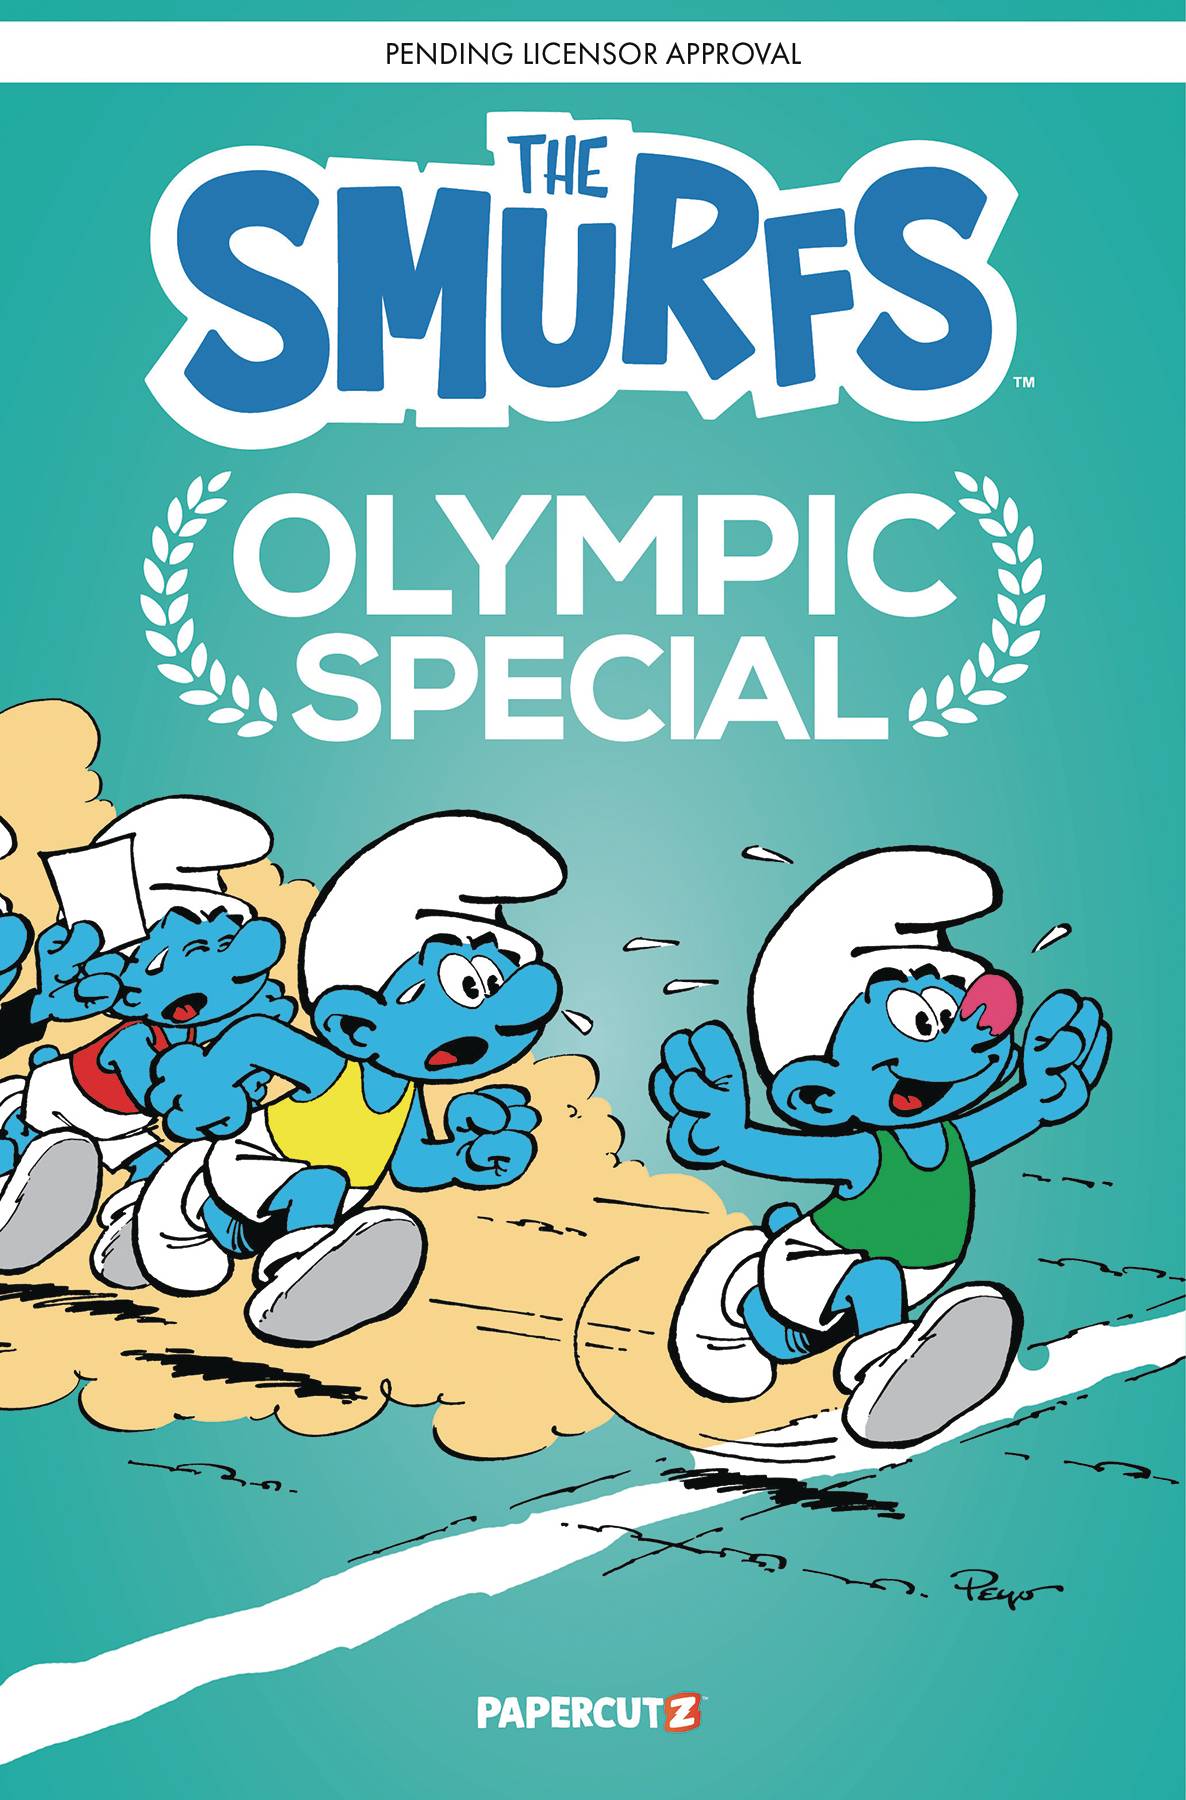 SMURFS OLYMPIC SPECIAL